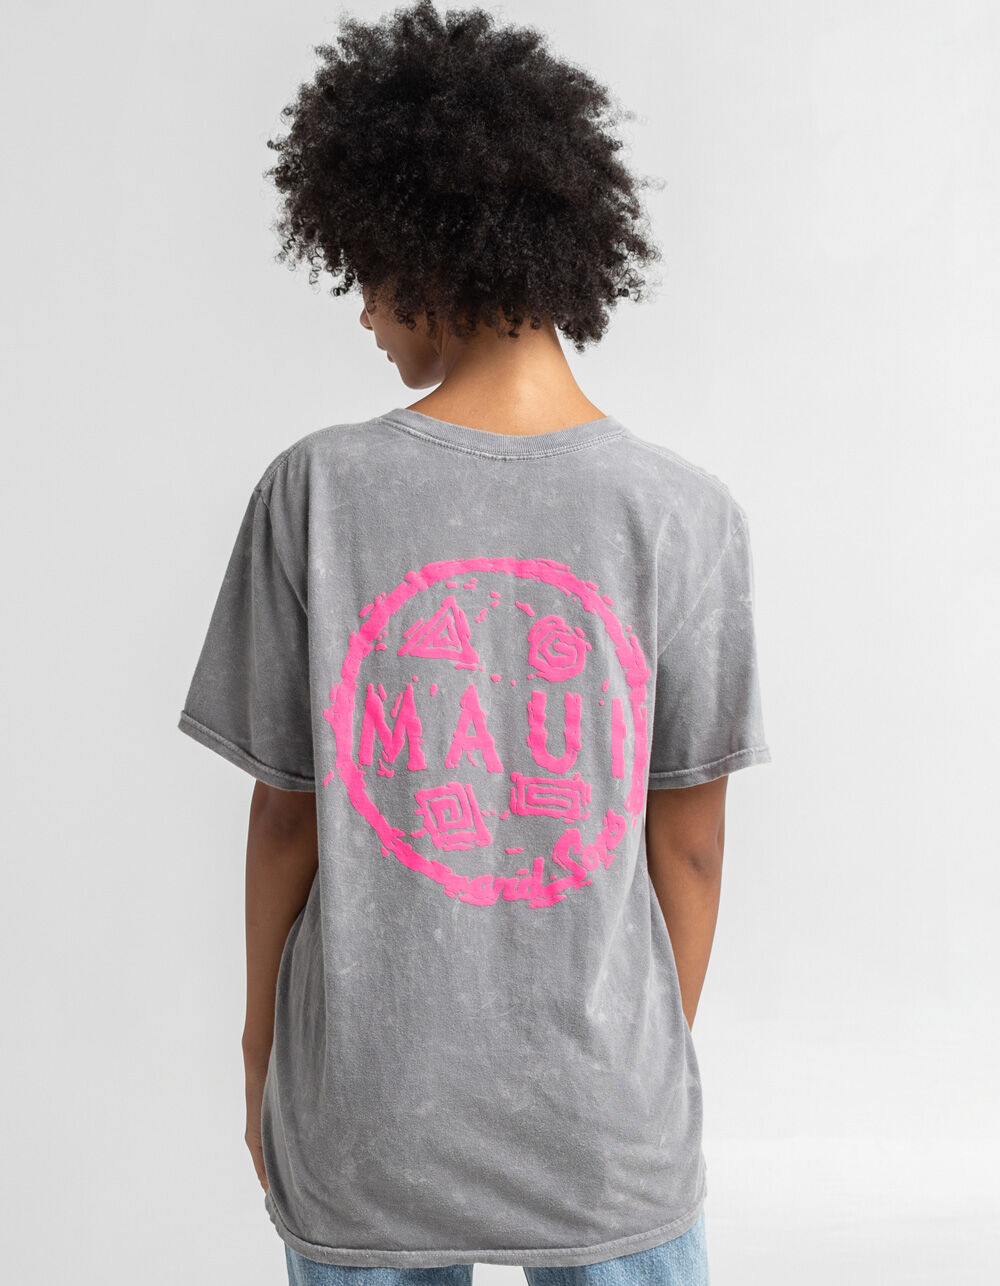 MAUI AND SONS Womens Oversized Tee - BLACK | Tillys